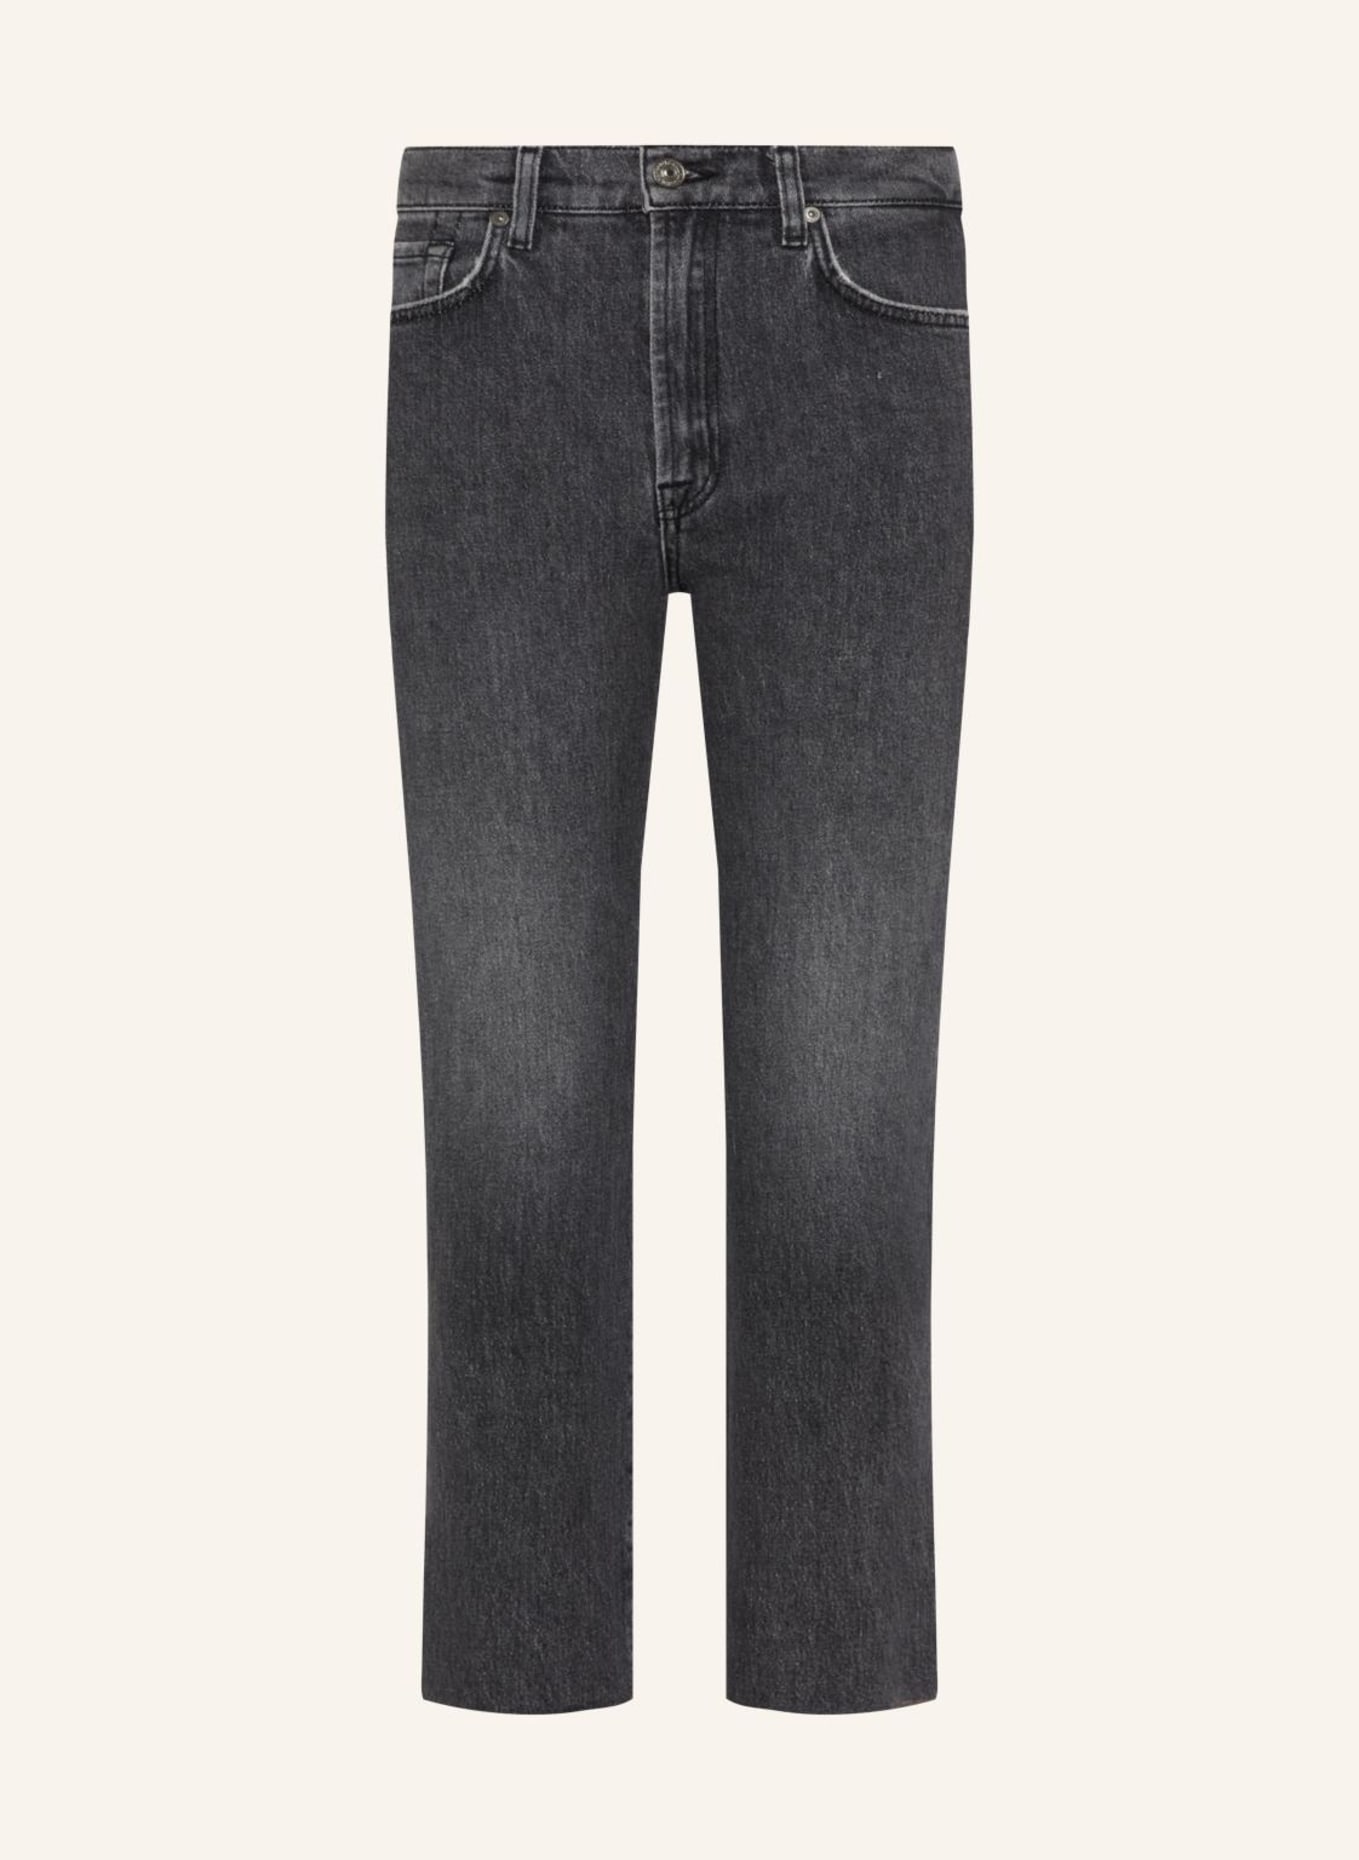 7 for all mankind Jeans LOGAN STOVEPIPE Straight fit, Farbe: GRAU (Bild 1)